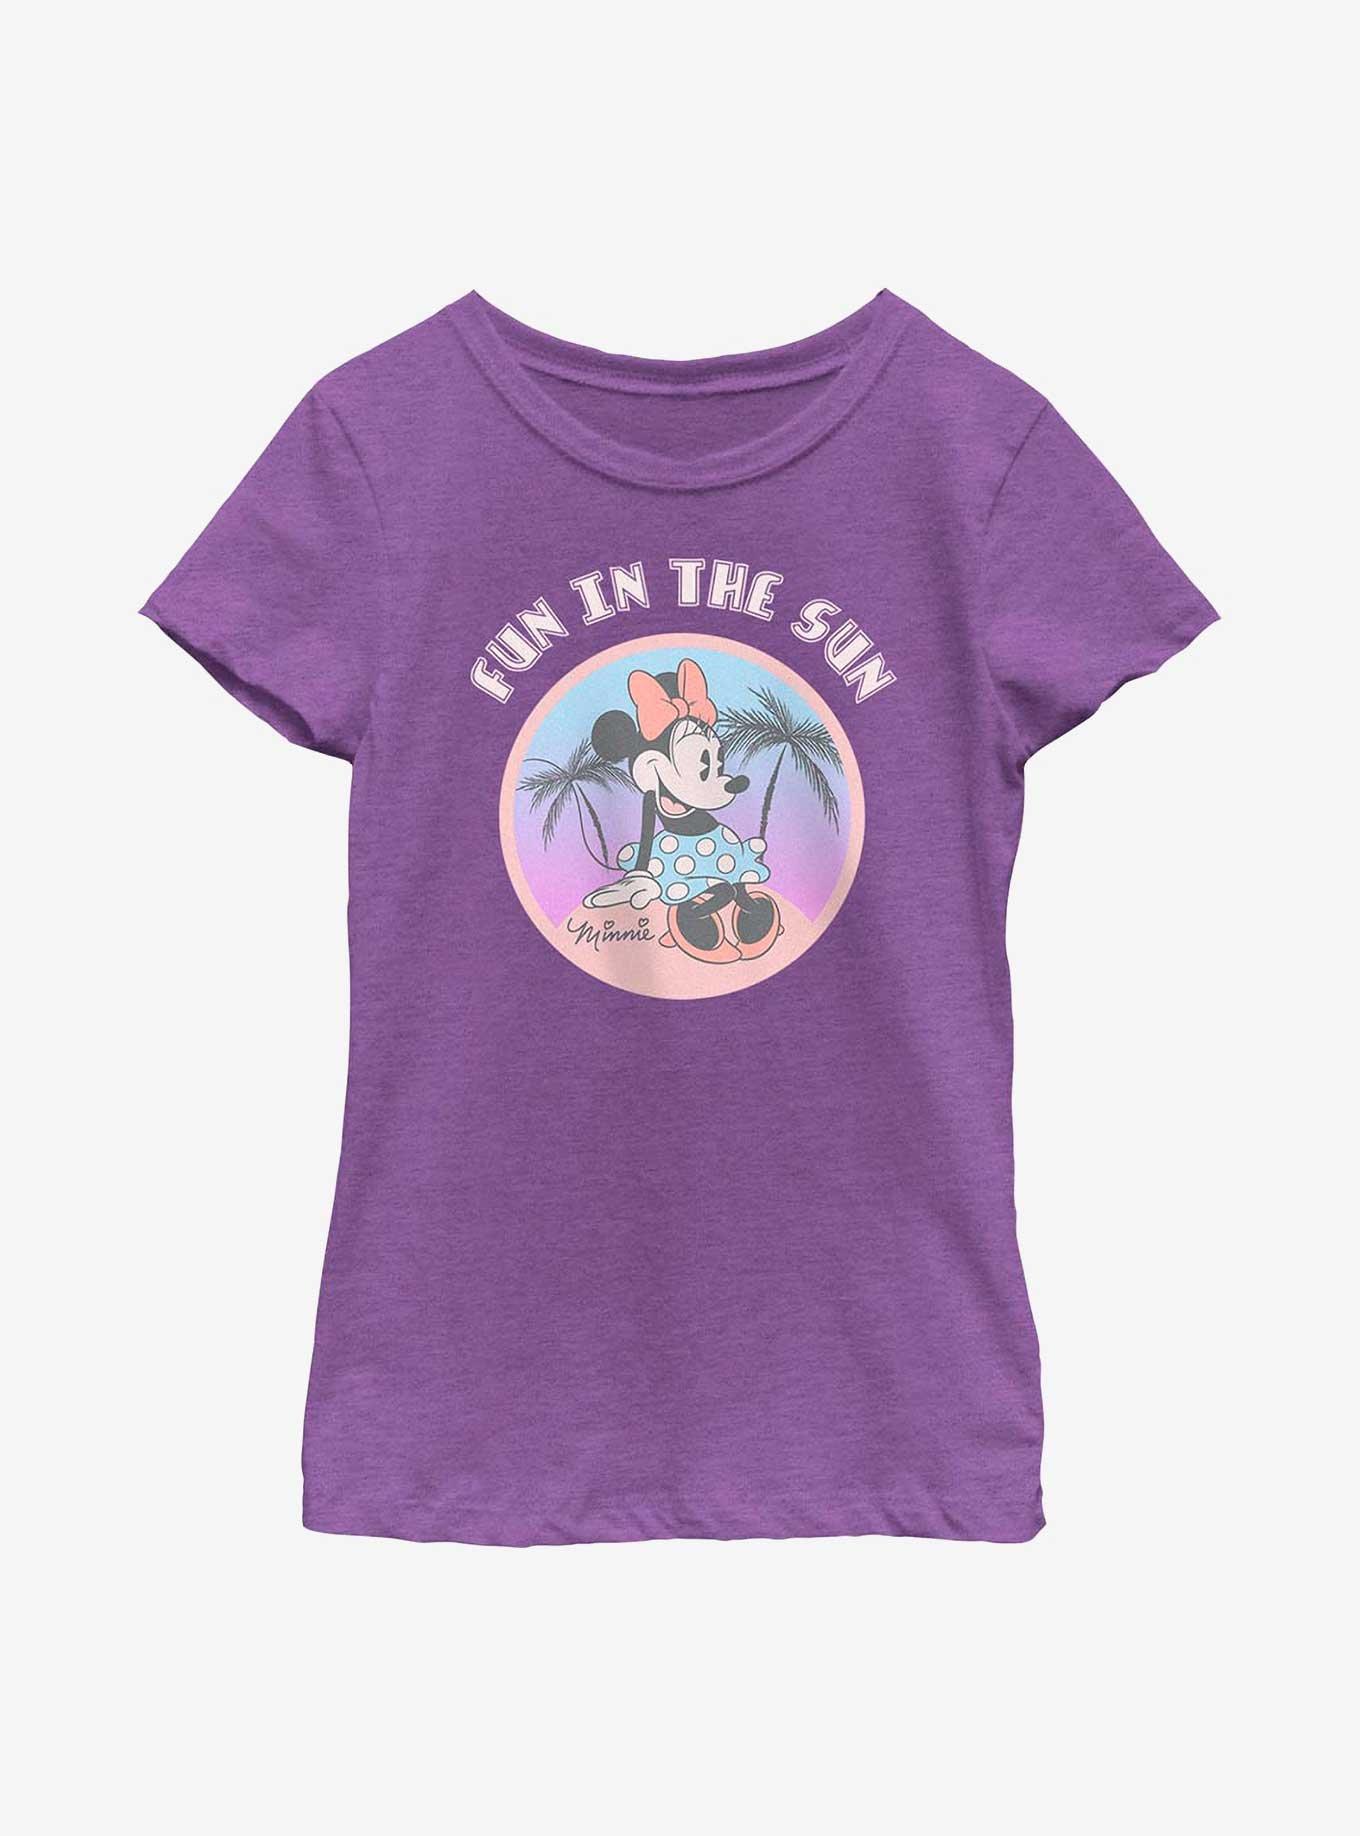 Disney Minnie Mouse Fun In The Sun Youth Girls T-Shirt, PURPLE BERRY, hi-res